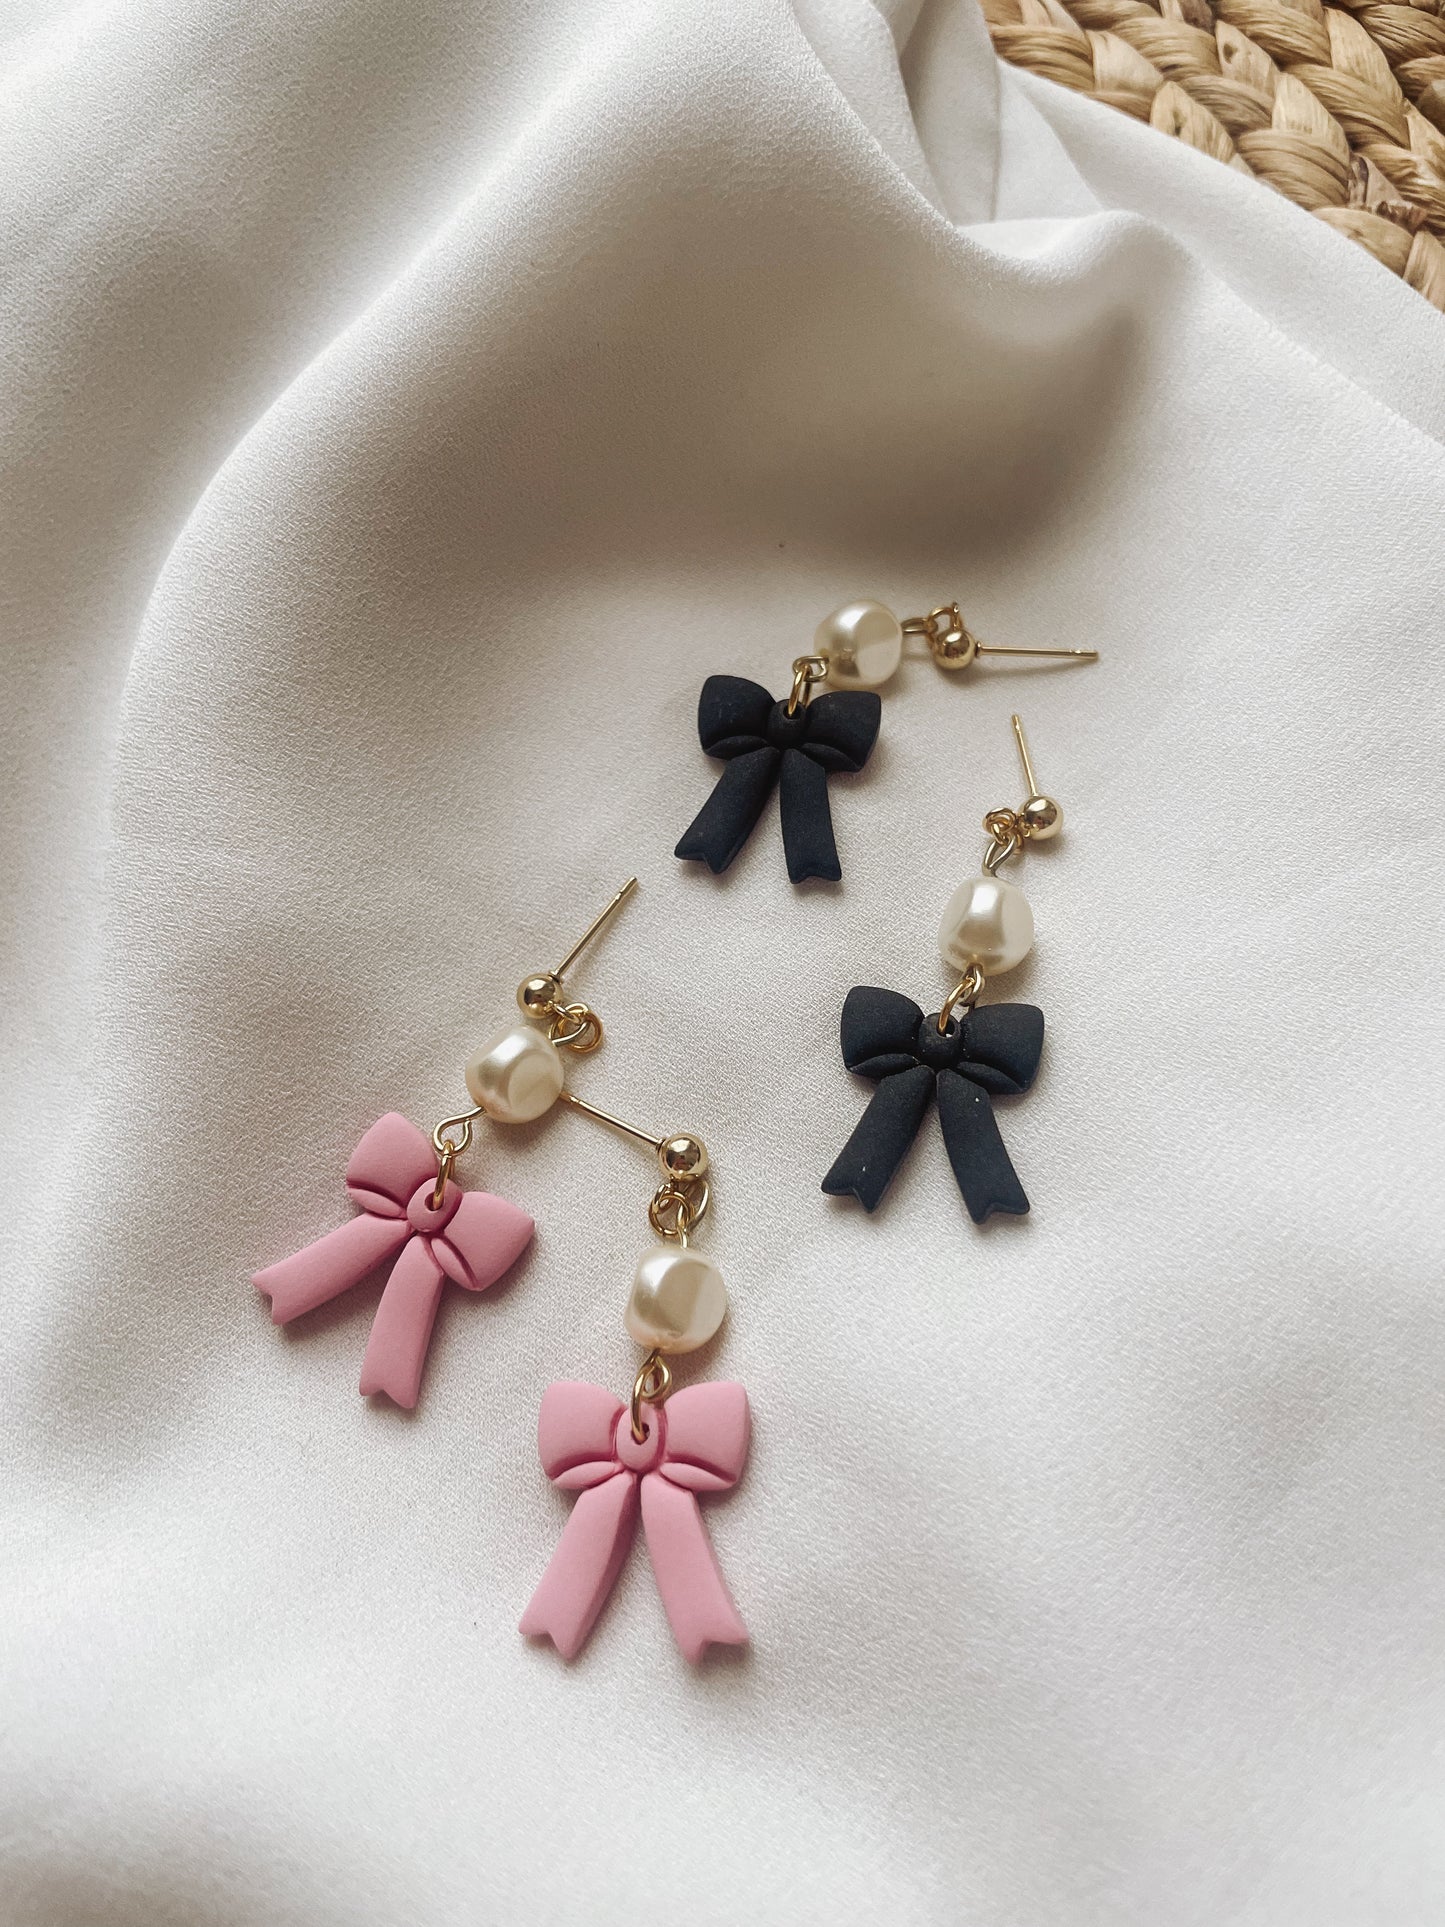 Black Bow Earrings with Pearls